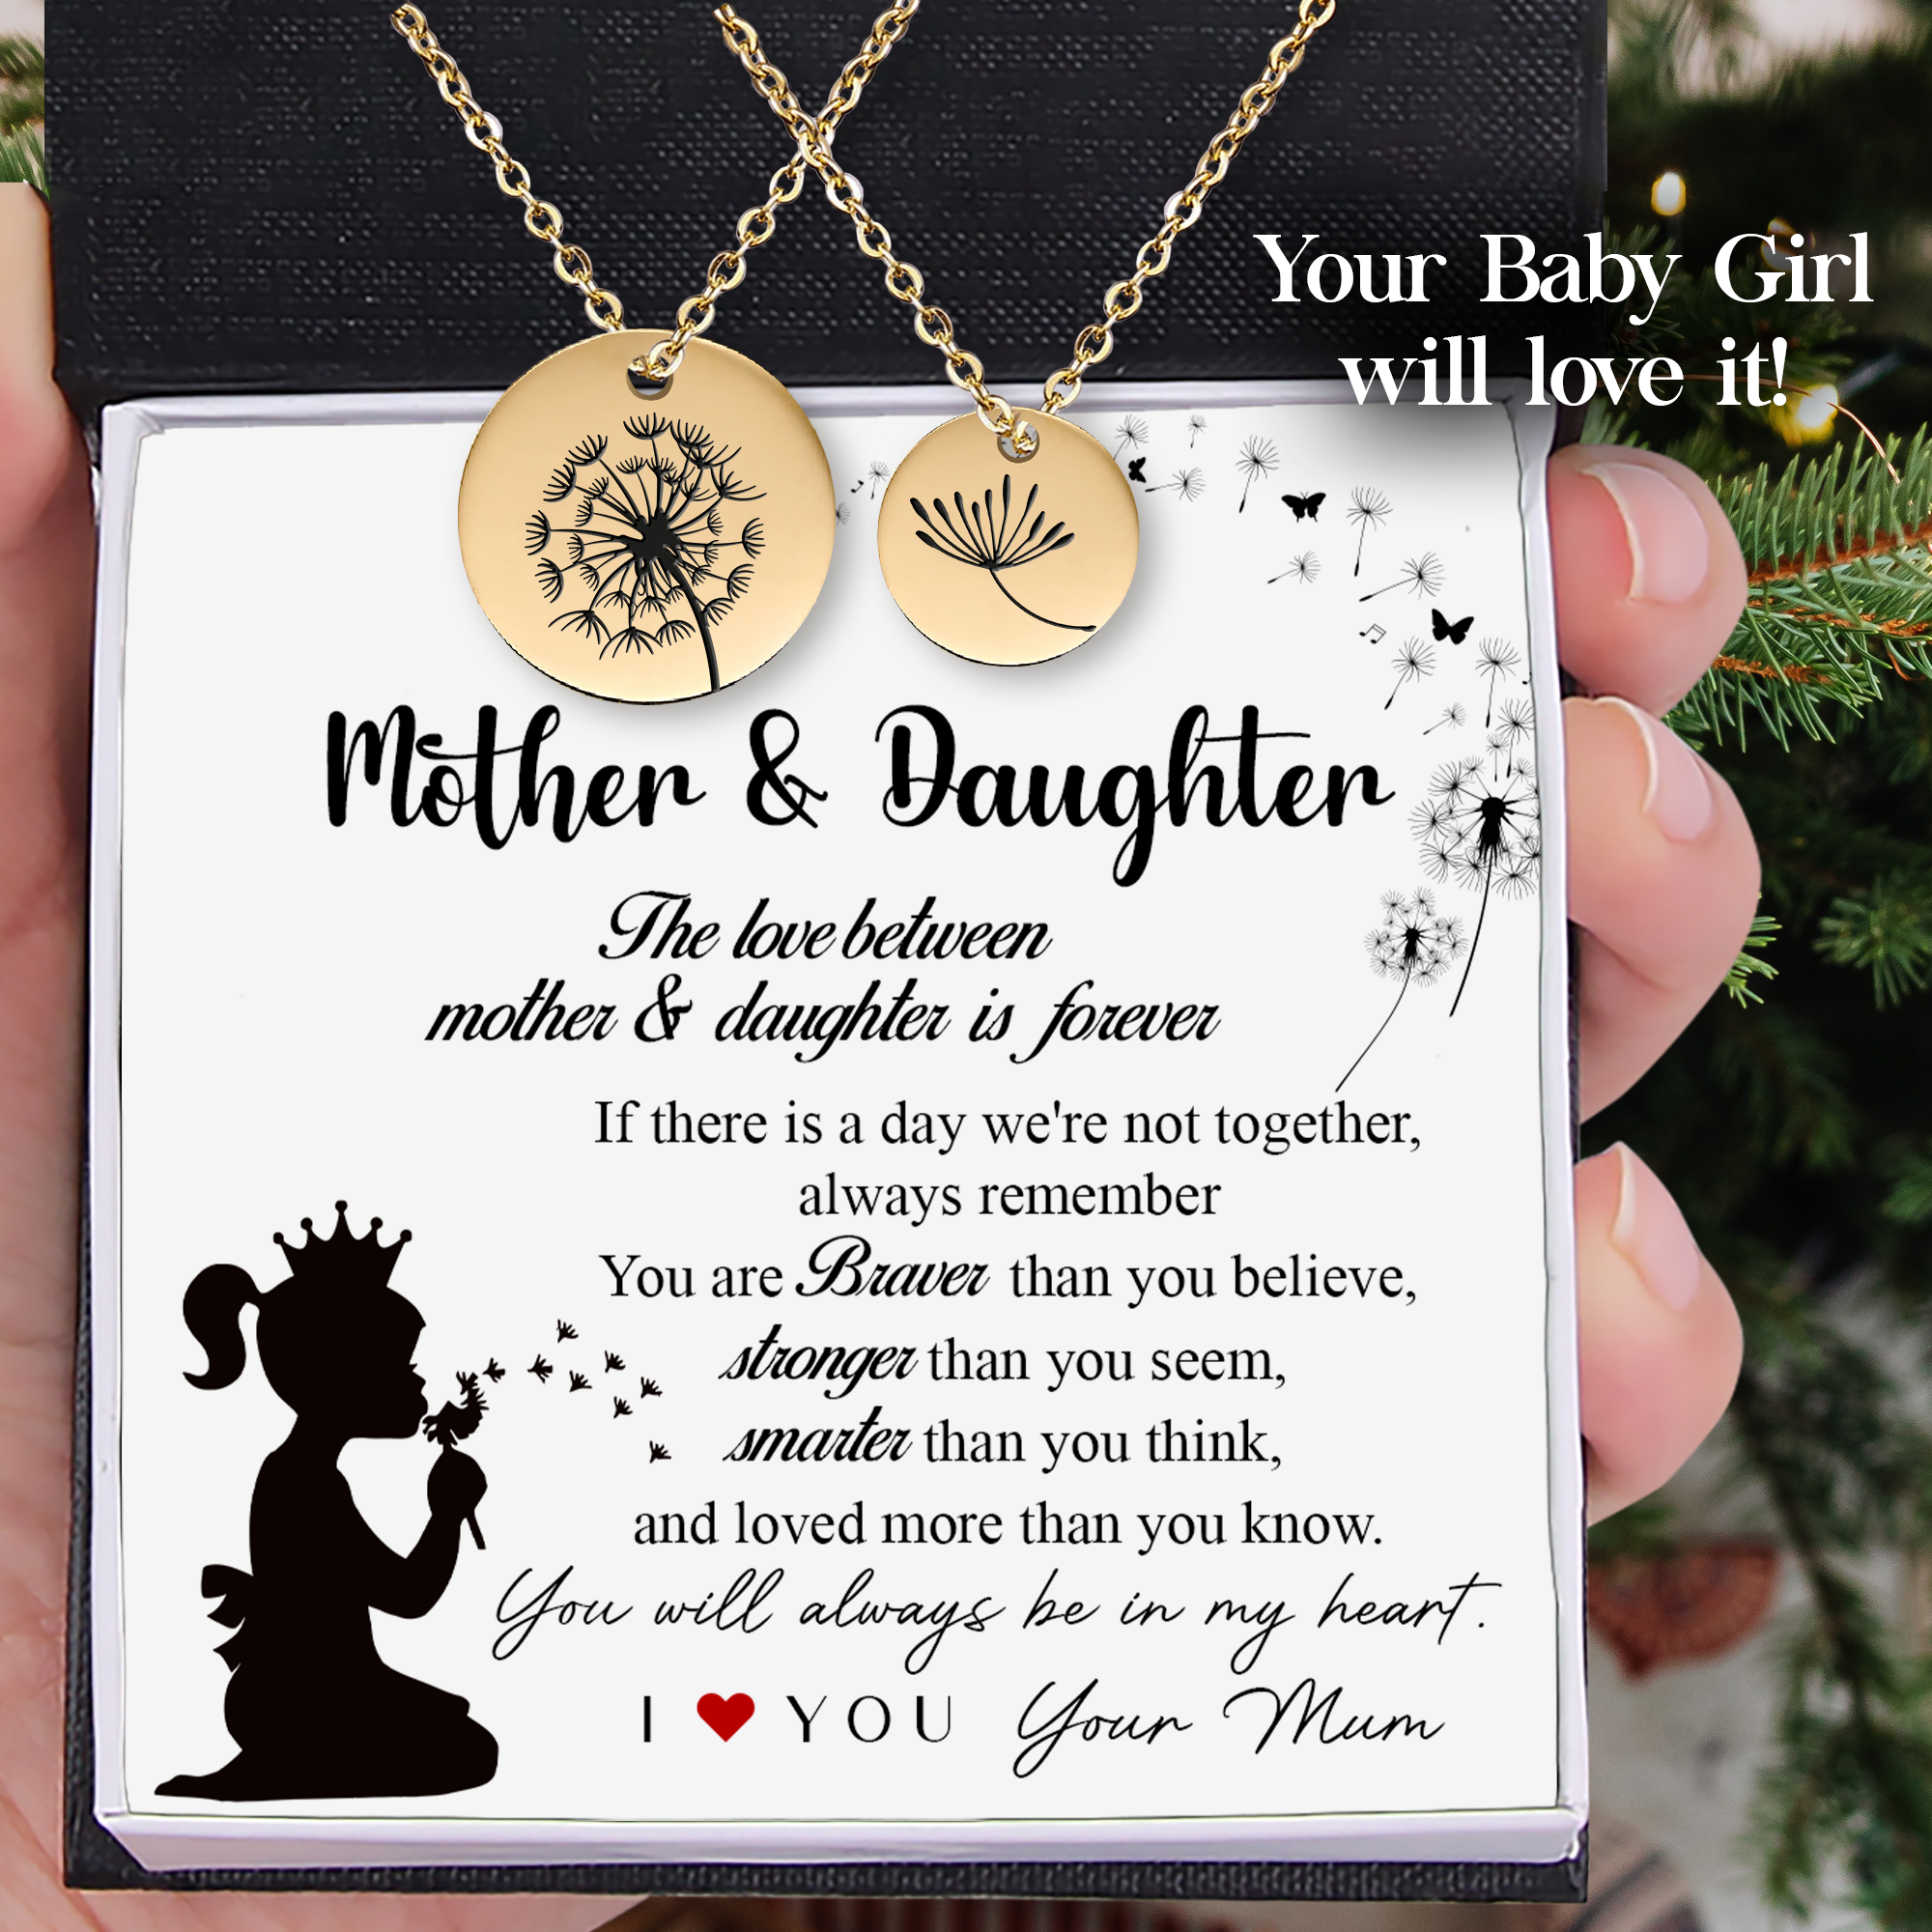 Mom & Daughter Necklace Set - Family - To My Daughter - You Will Always Be In My Heart - Ukgnnt17002